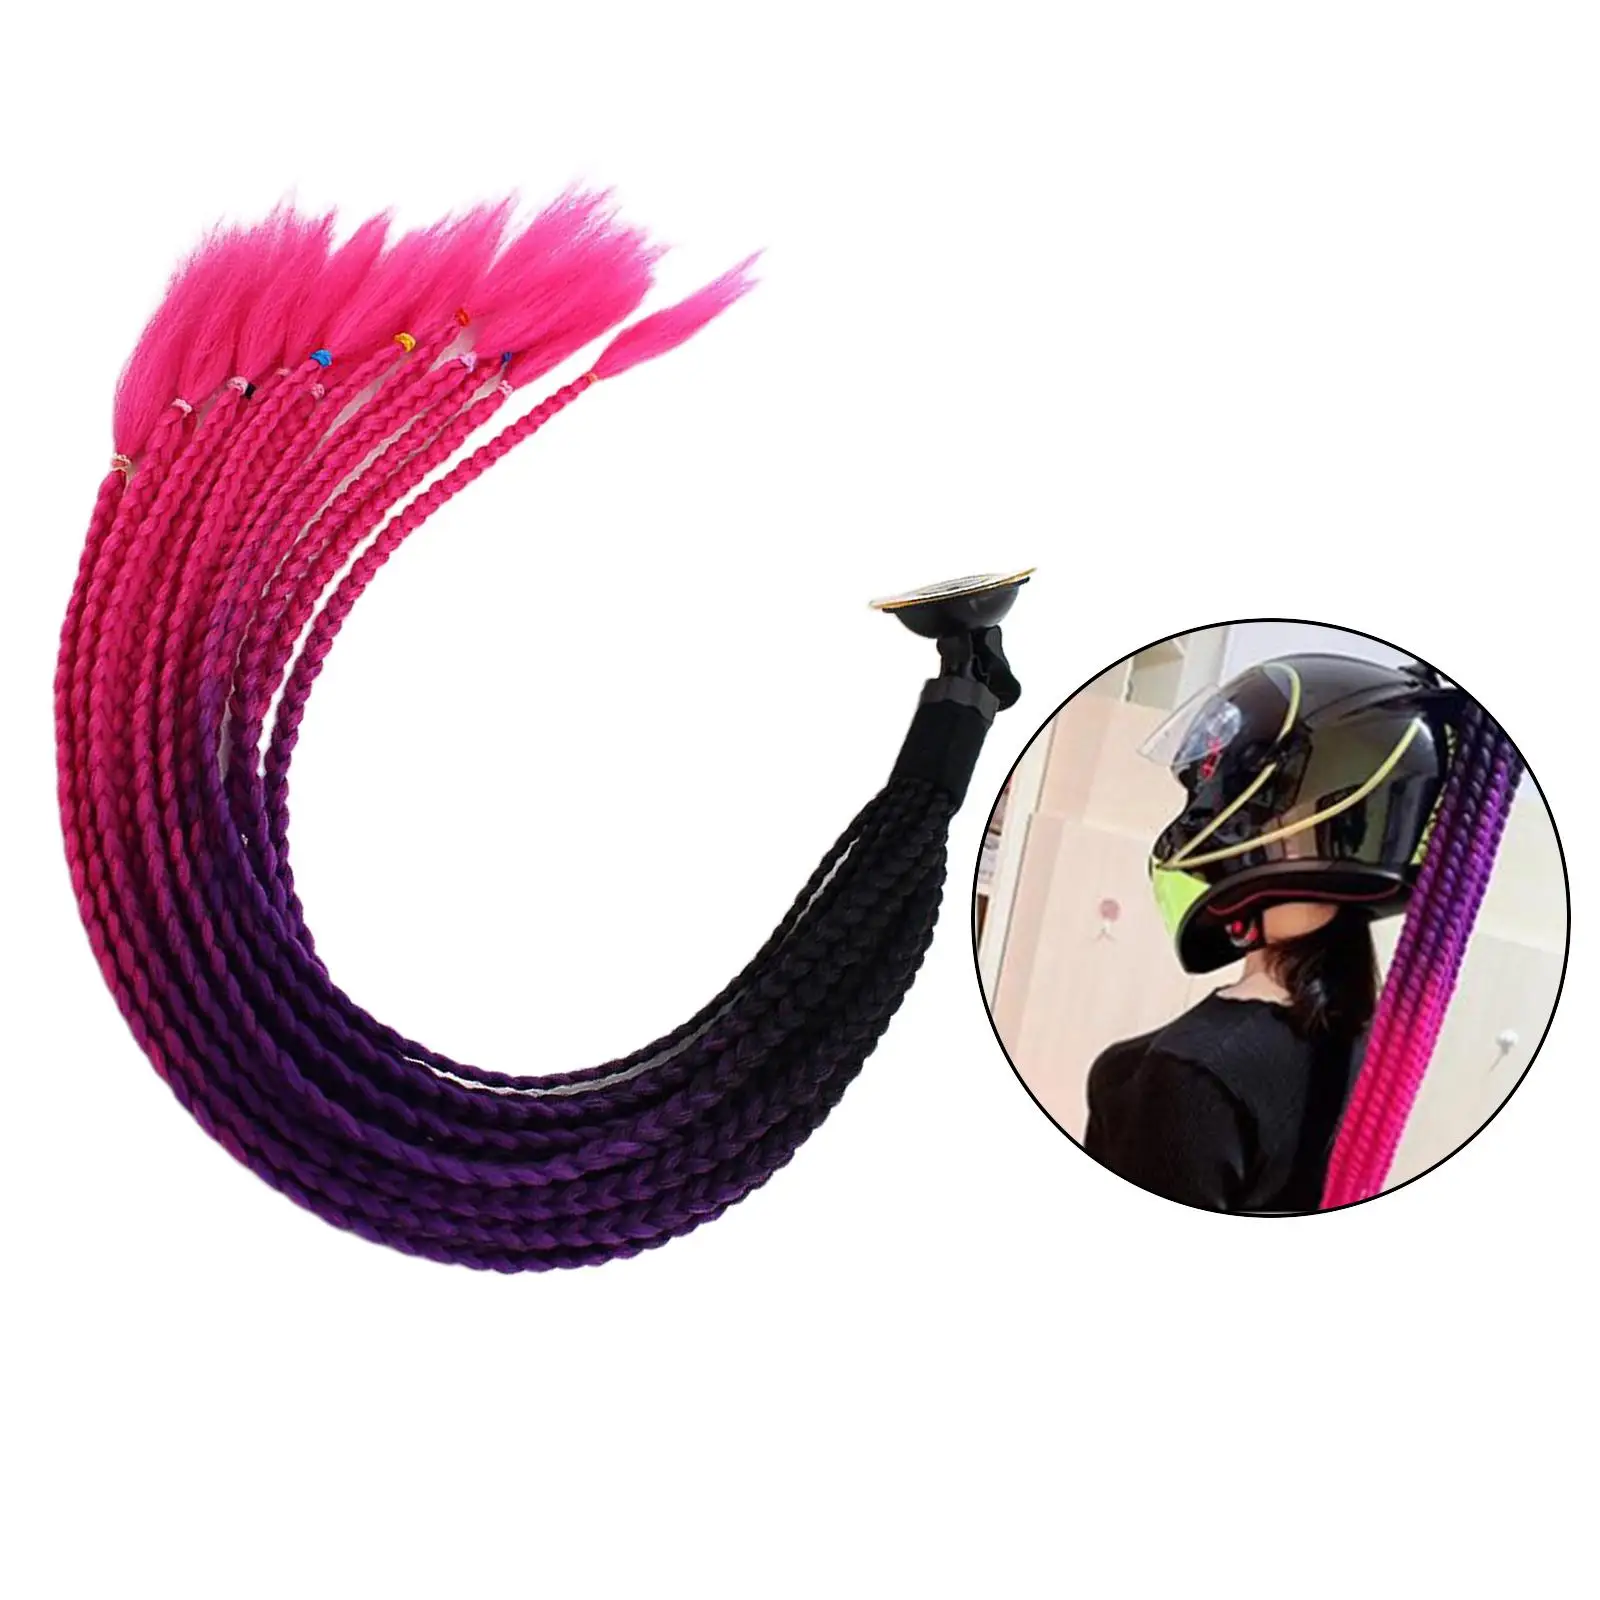 2x Unisex Adults  Gradient Ramp  Ponytail Curly  Hair for Motorcycle Motor  Black Rose Red